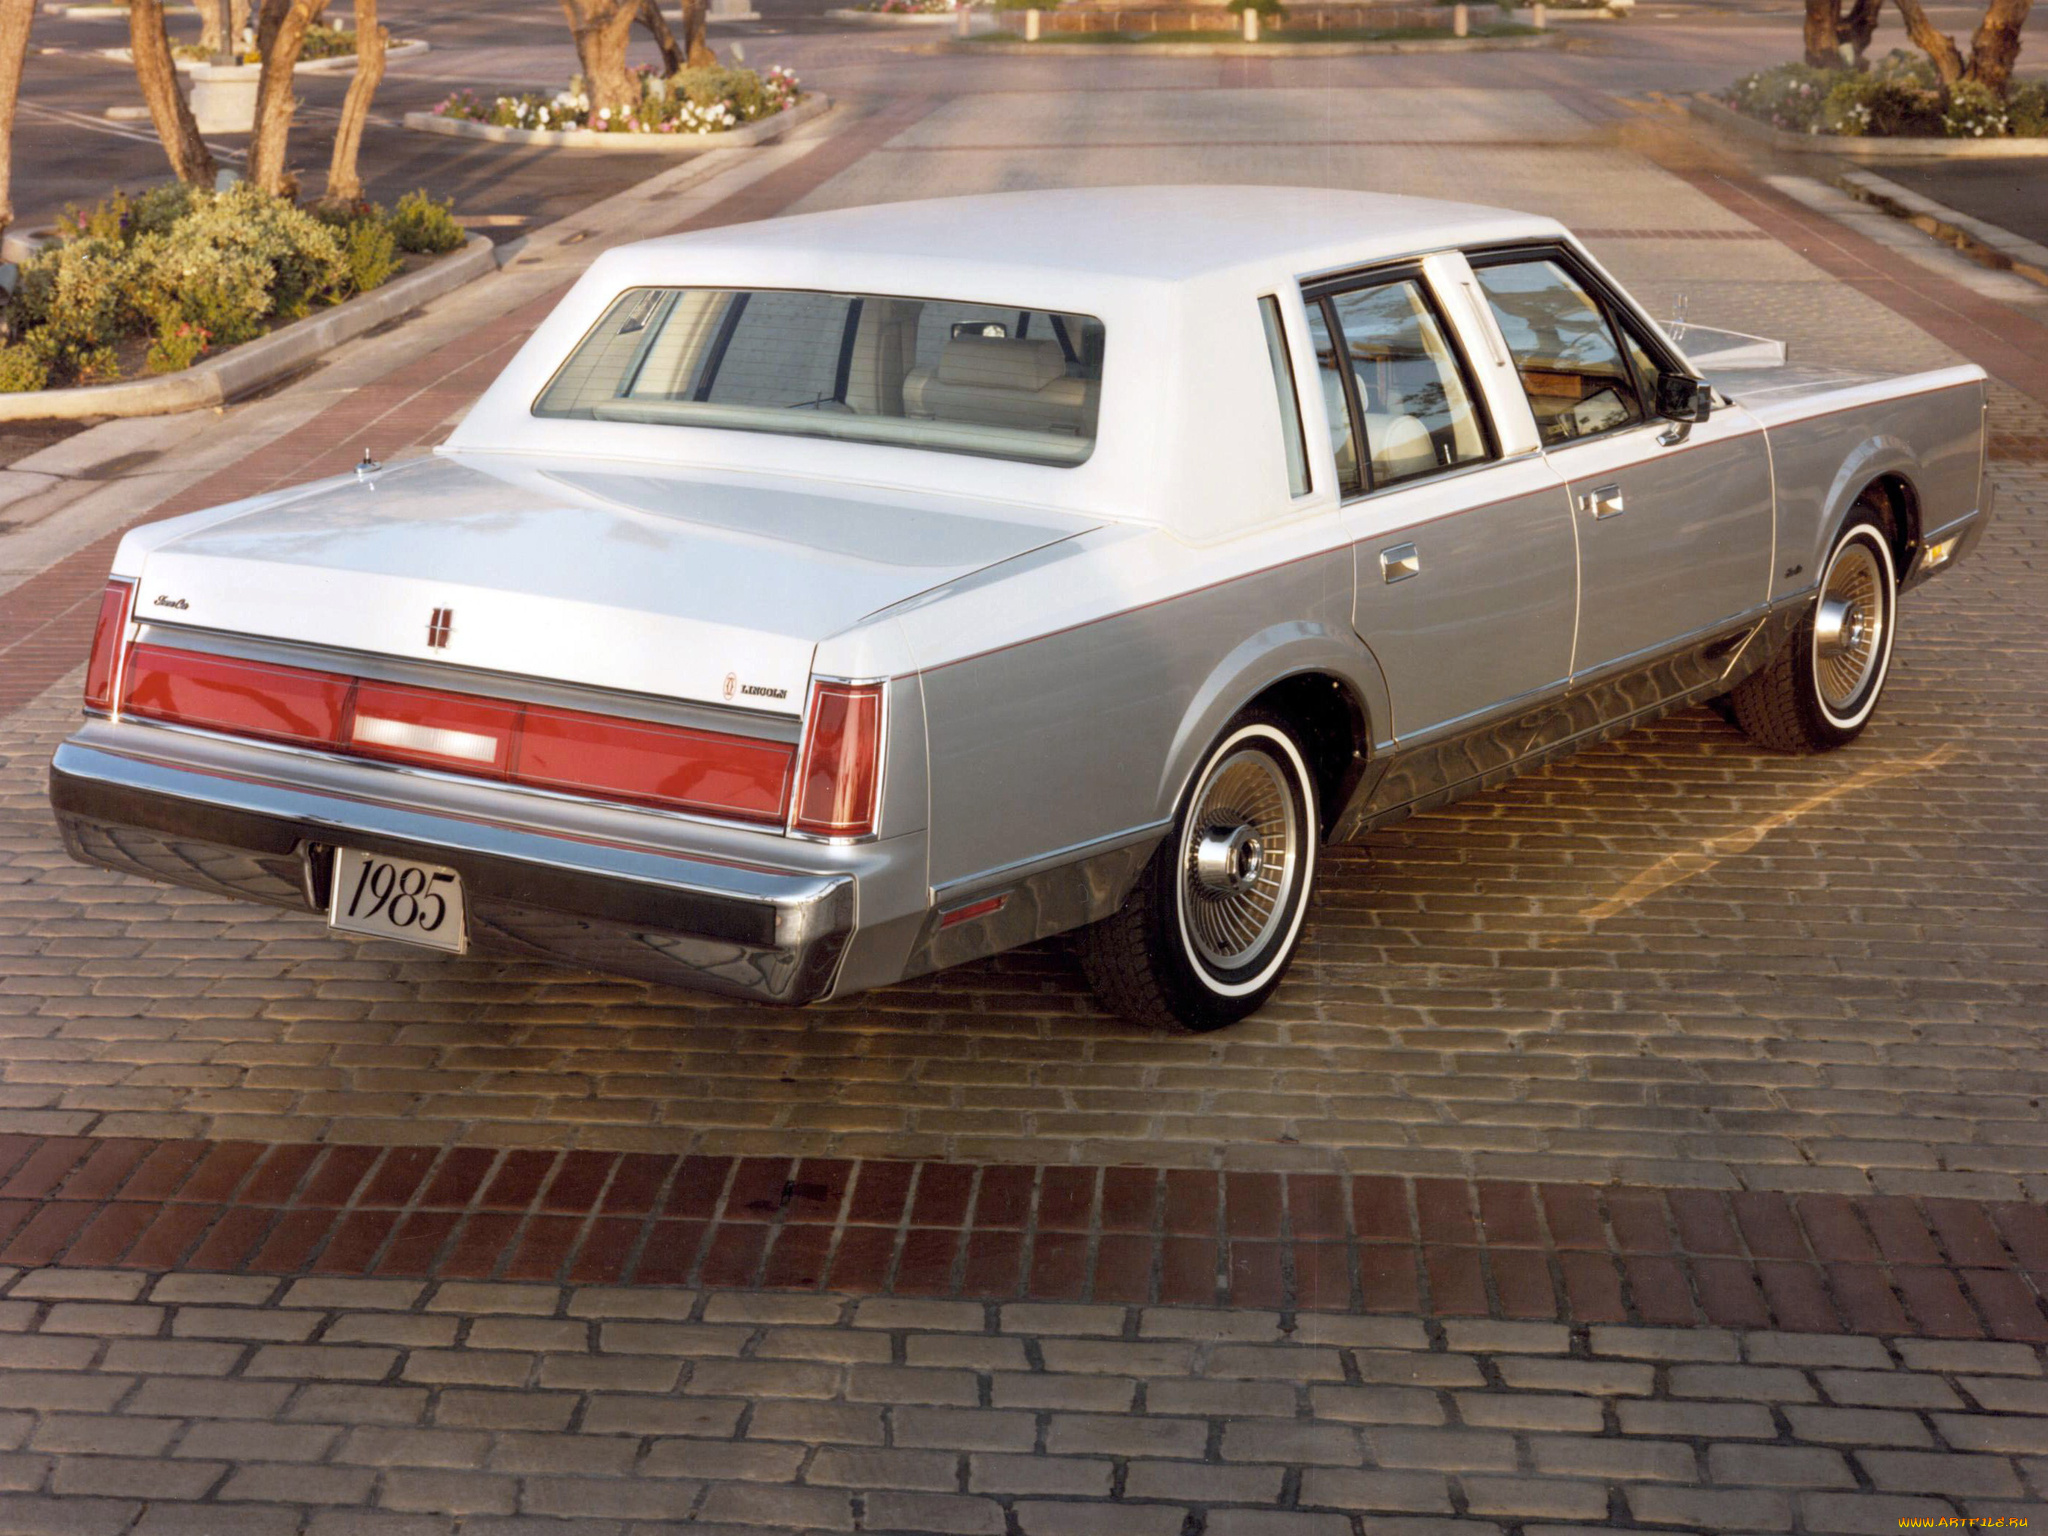 Town car 1. Lincoln Town car 1980. Lincoln Town car 1985. Линкольн седан 1980. Lincoln Continental Town car 1980.